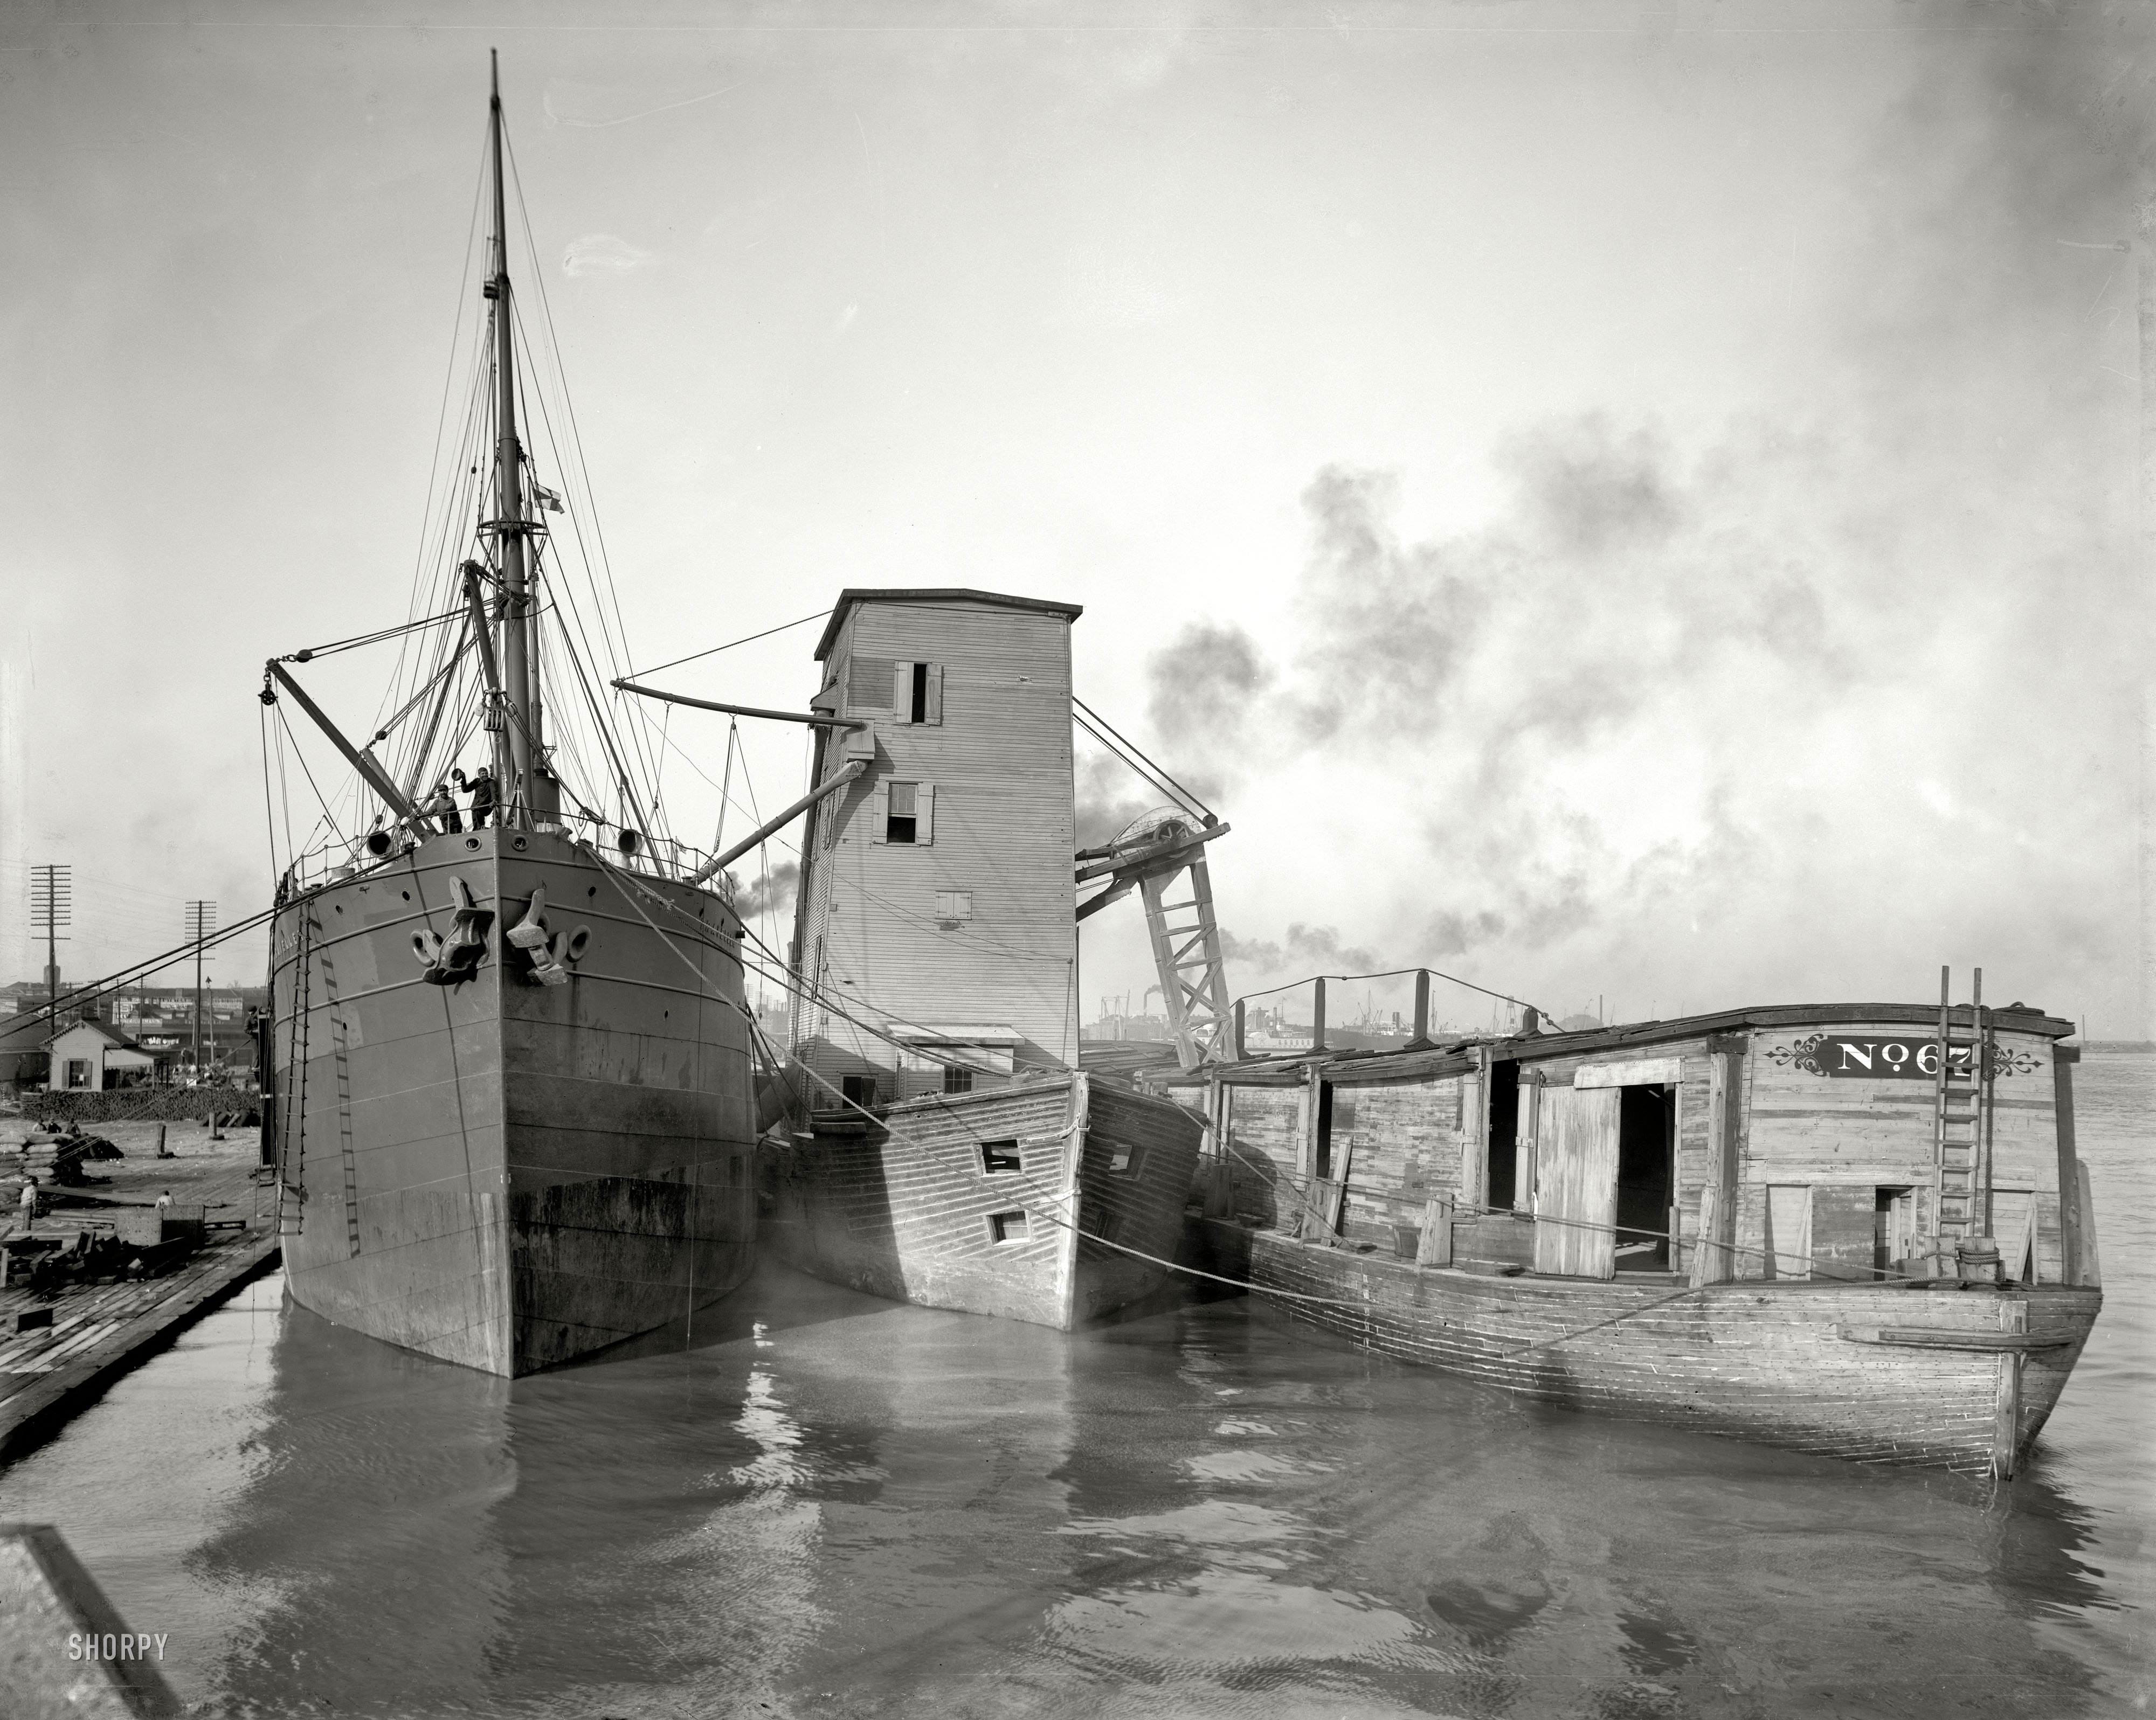 "Steamer loading grain from floating elevator." Continuing our visit to the New Orleans waterfront circa 1906. 8x10 inch glass negative. View full size.